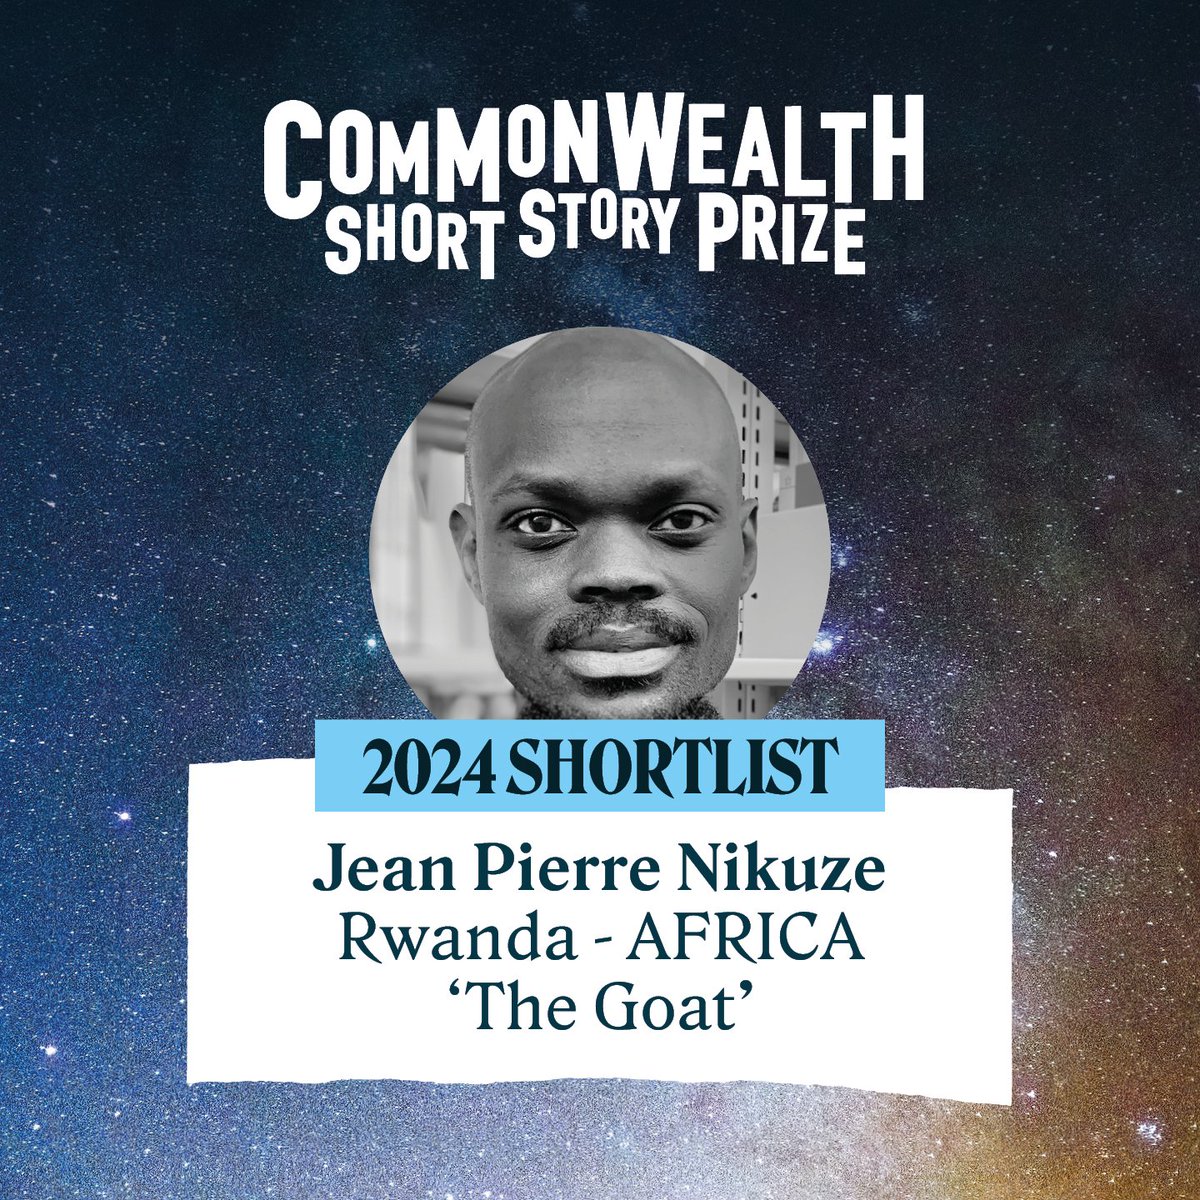 Jean Pierre Nikuze is the first ever Rwandan writer shortlisted for the prize. His story, 'The Goat', is about a woman whose newborn is stolen from the maternity ward, and her own unusual way of dealing with the loss.